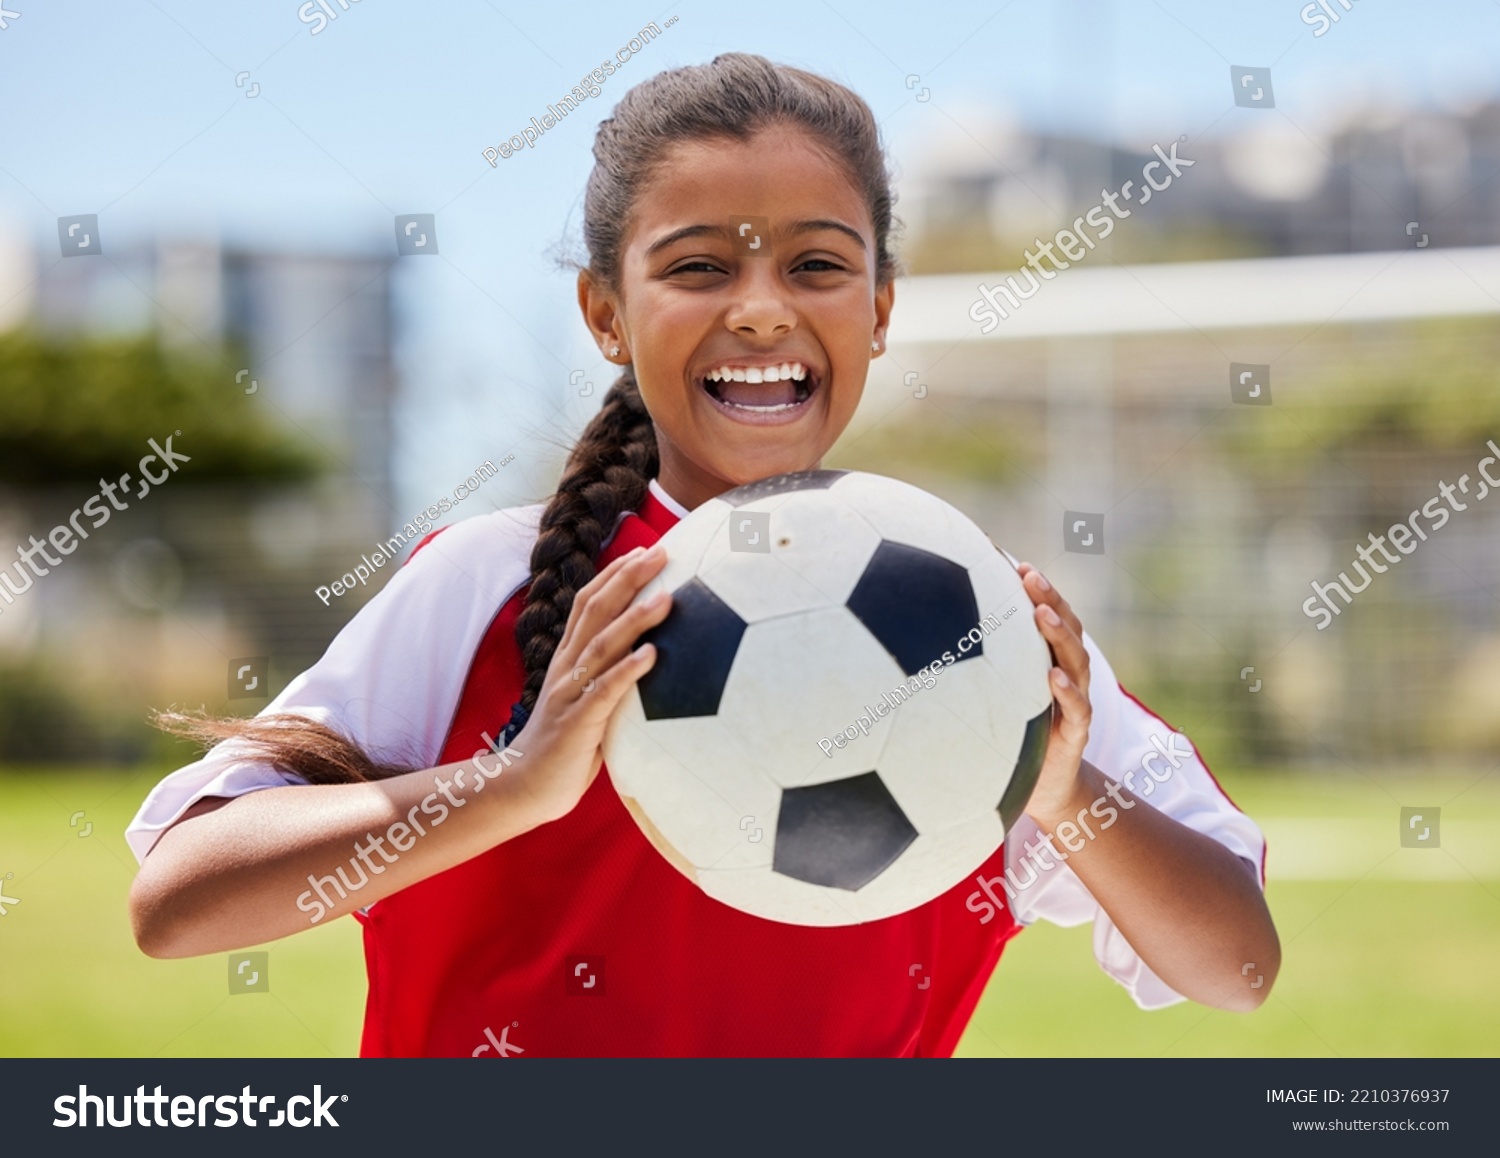 Soccer, sports and happy Indian girl athlete holding a sport ball on a school field. Portrait of fitness, football and exercise of a child smile excited about training, workout and game motivation #2210376937